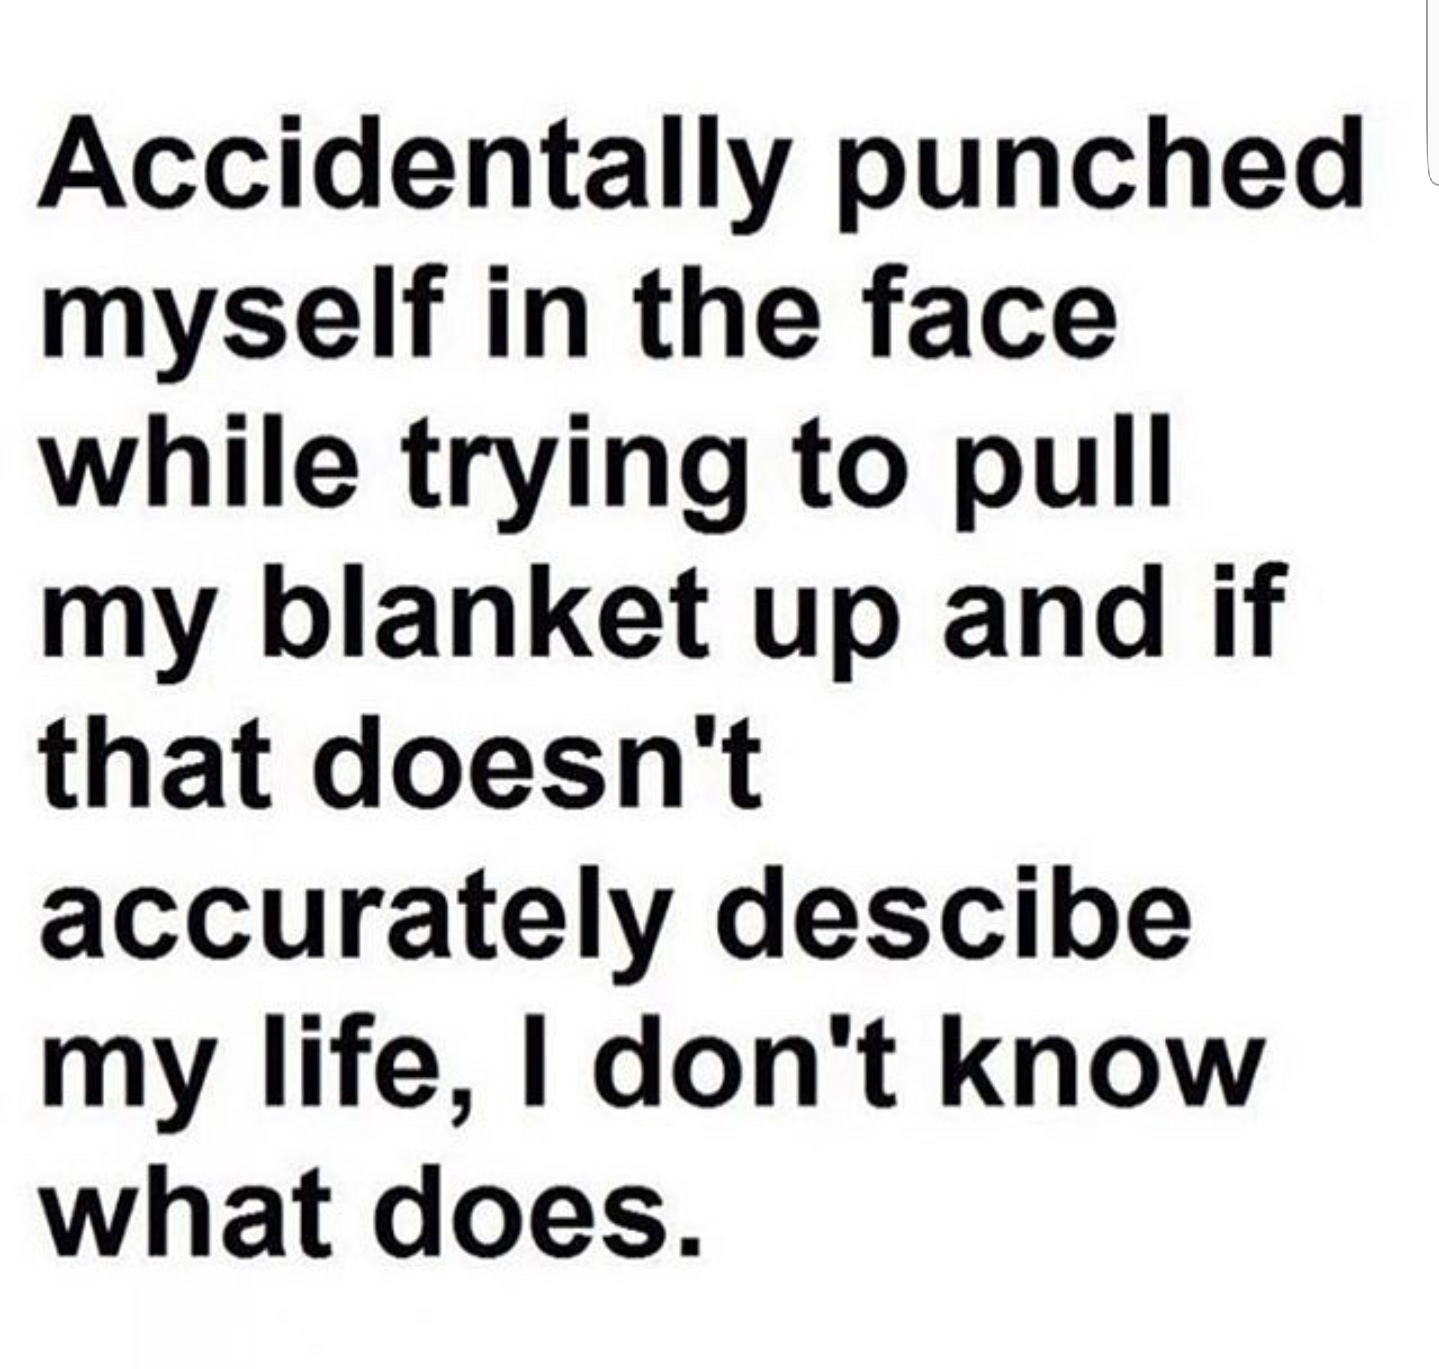 my kind of people laugh at offensive humor - Accidentally punched myself in the face while trying to pull my blanket up and if that doesn't accurately descibe my life, I don't know what does.